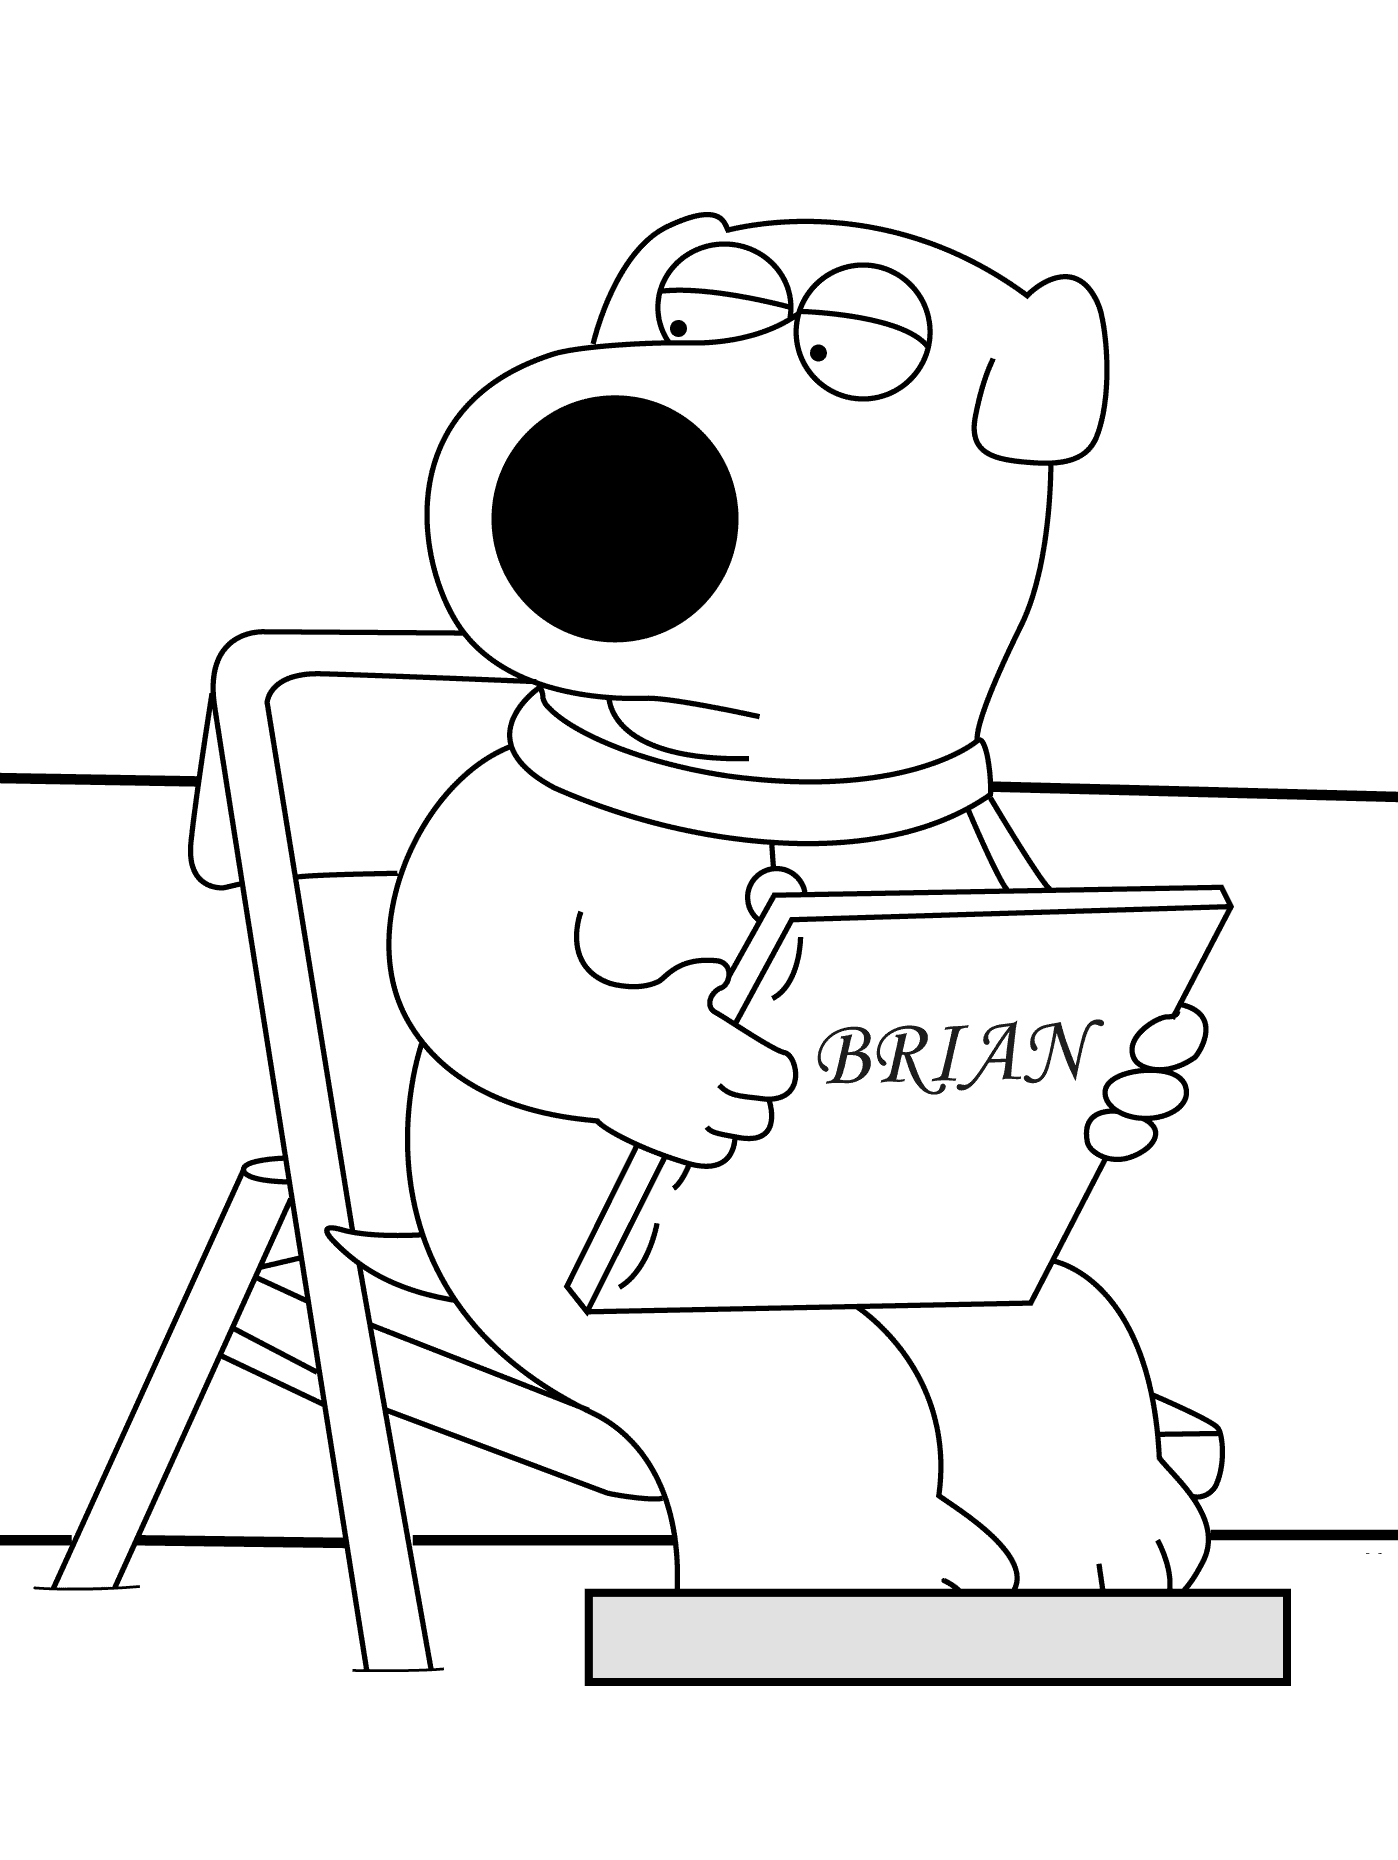 4 Best Family Guy Coloring Pages for Kids - Updated 2018